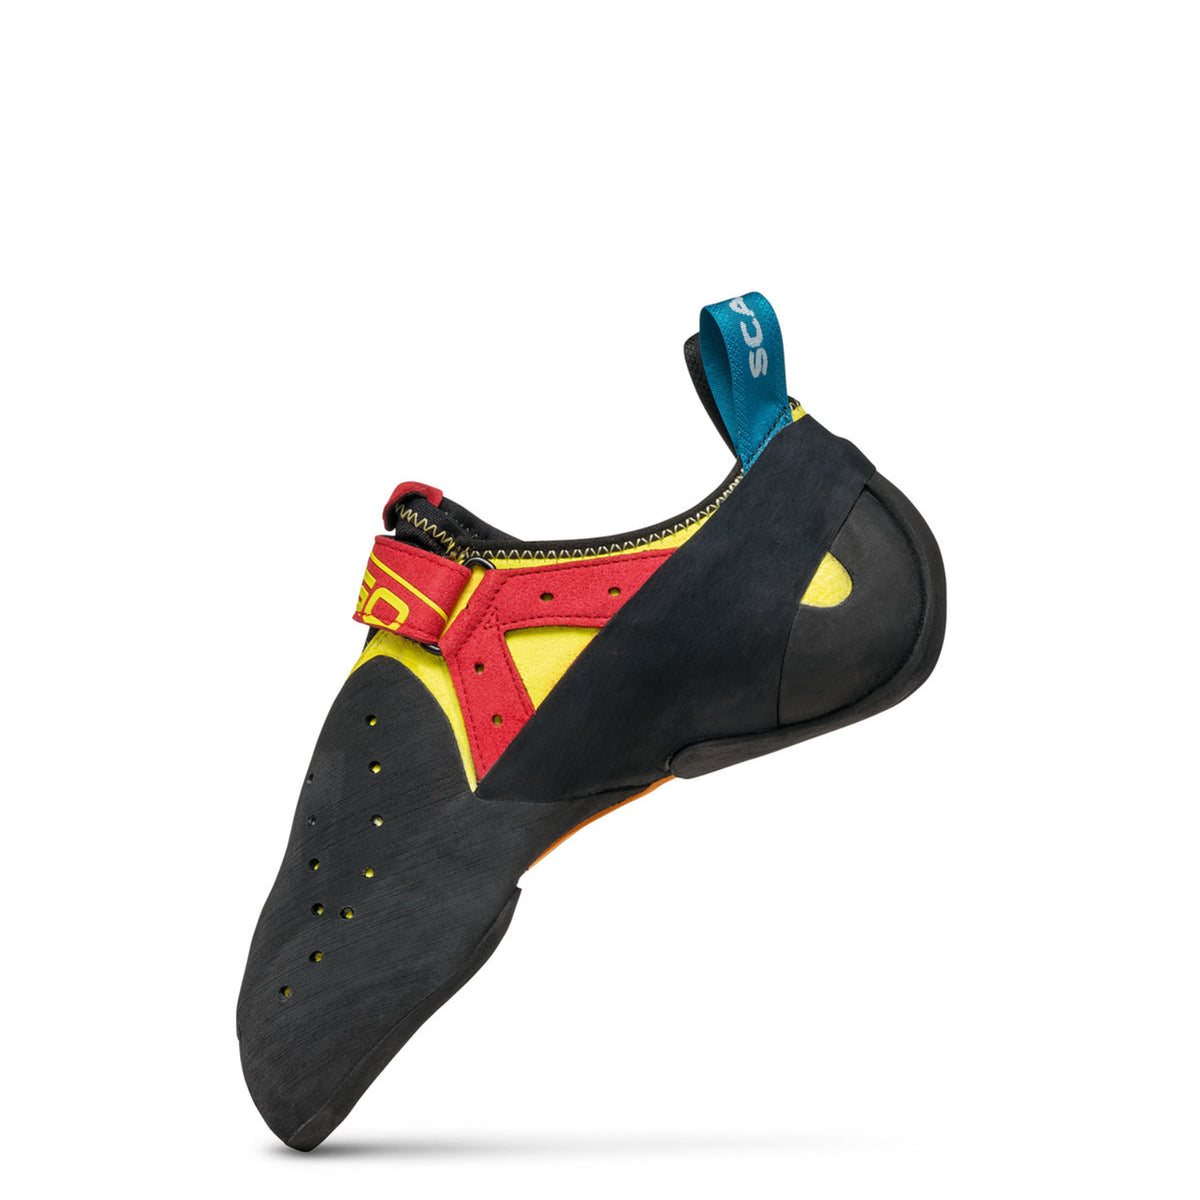 Scarpa Drago climbing shoe, in black and yellow colours